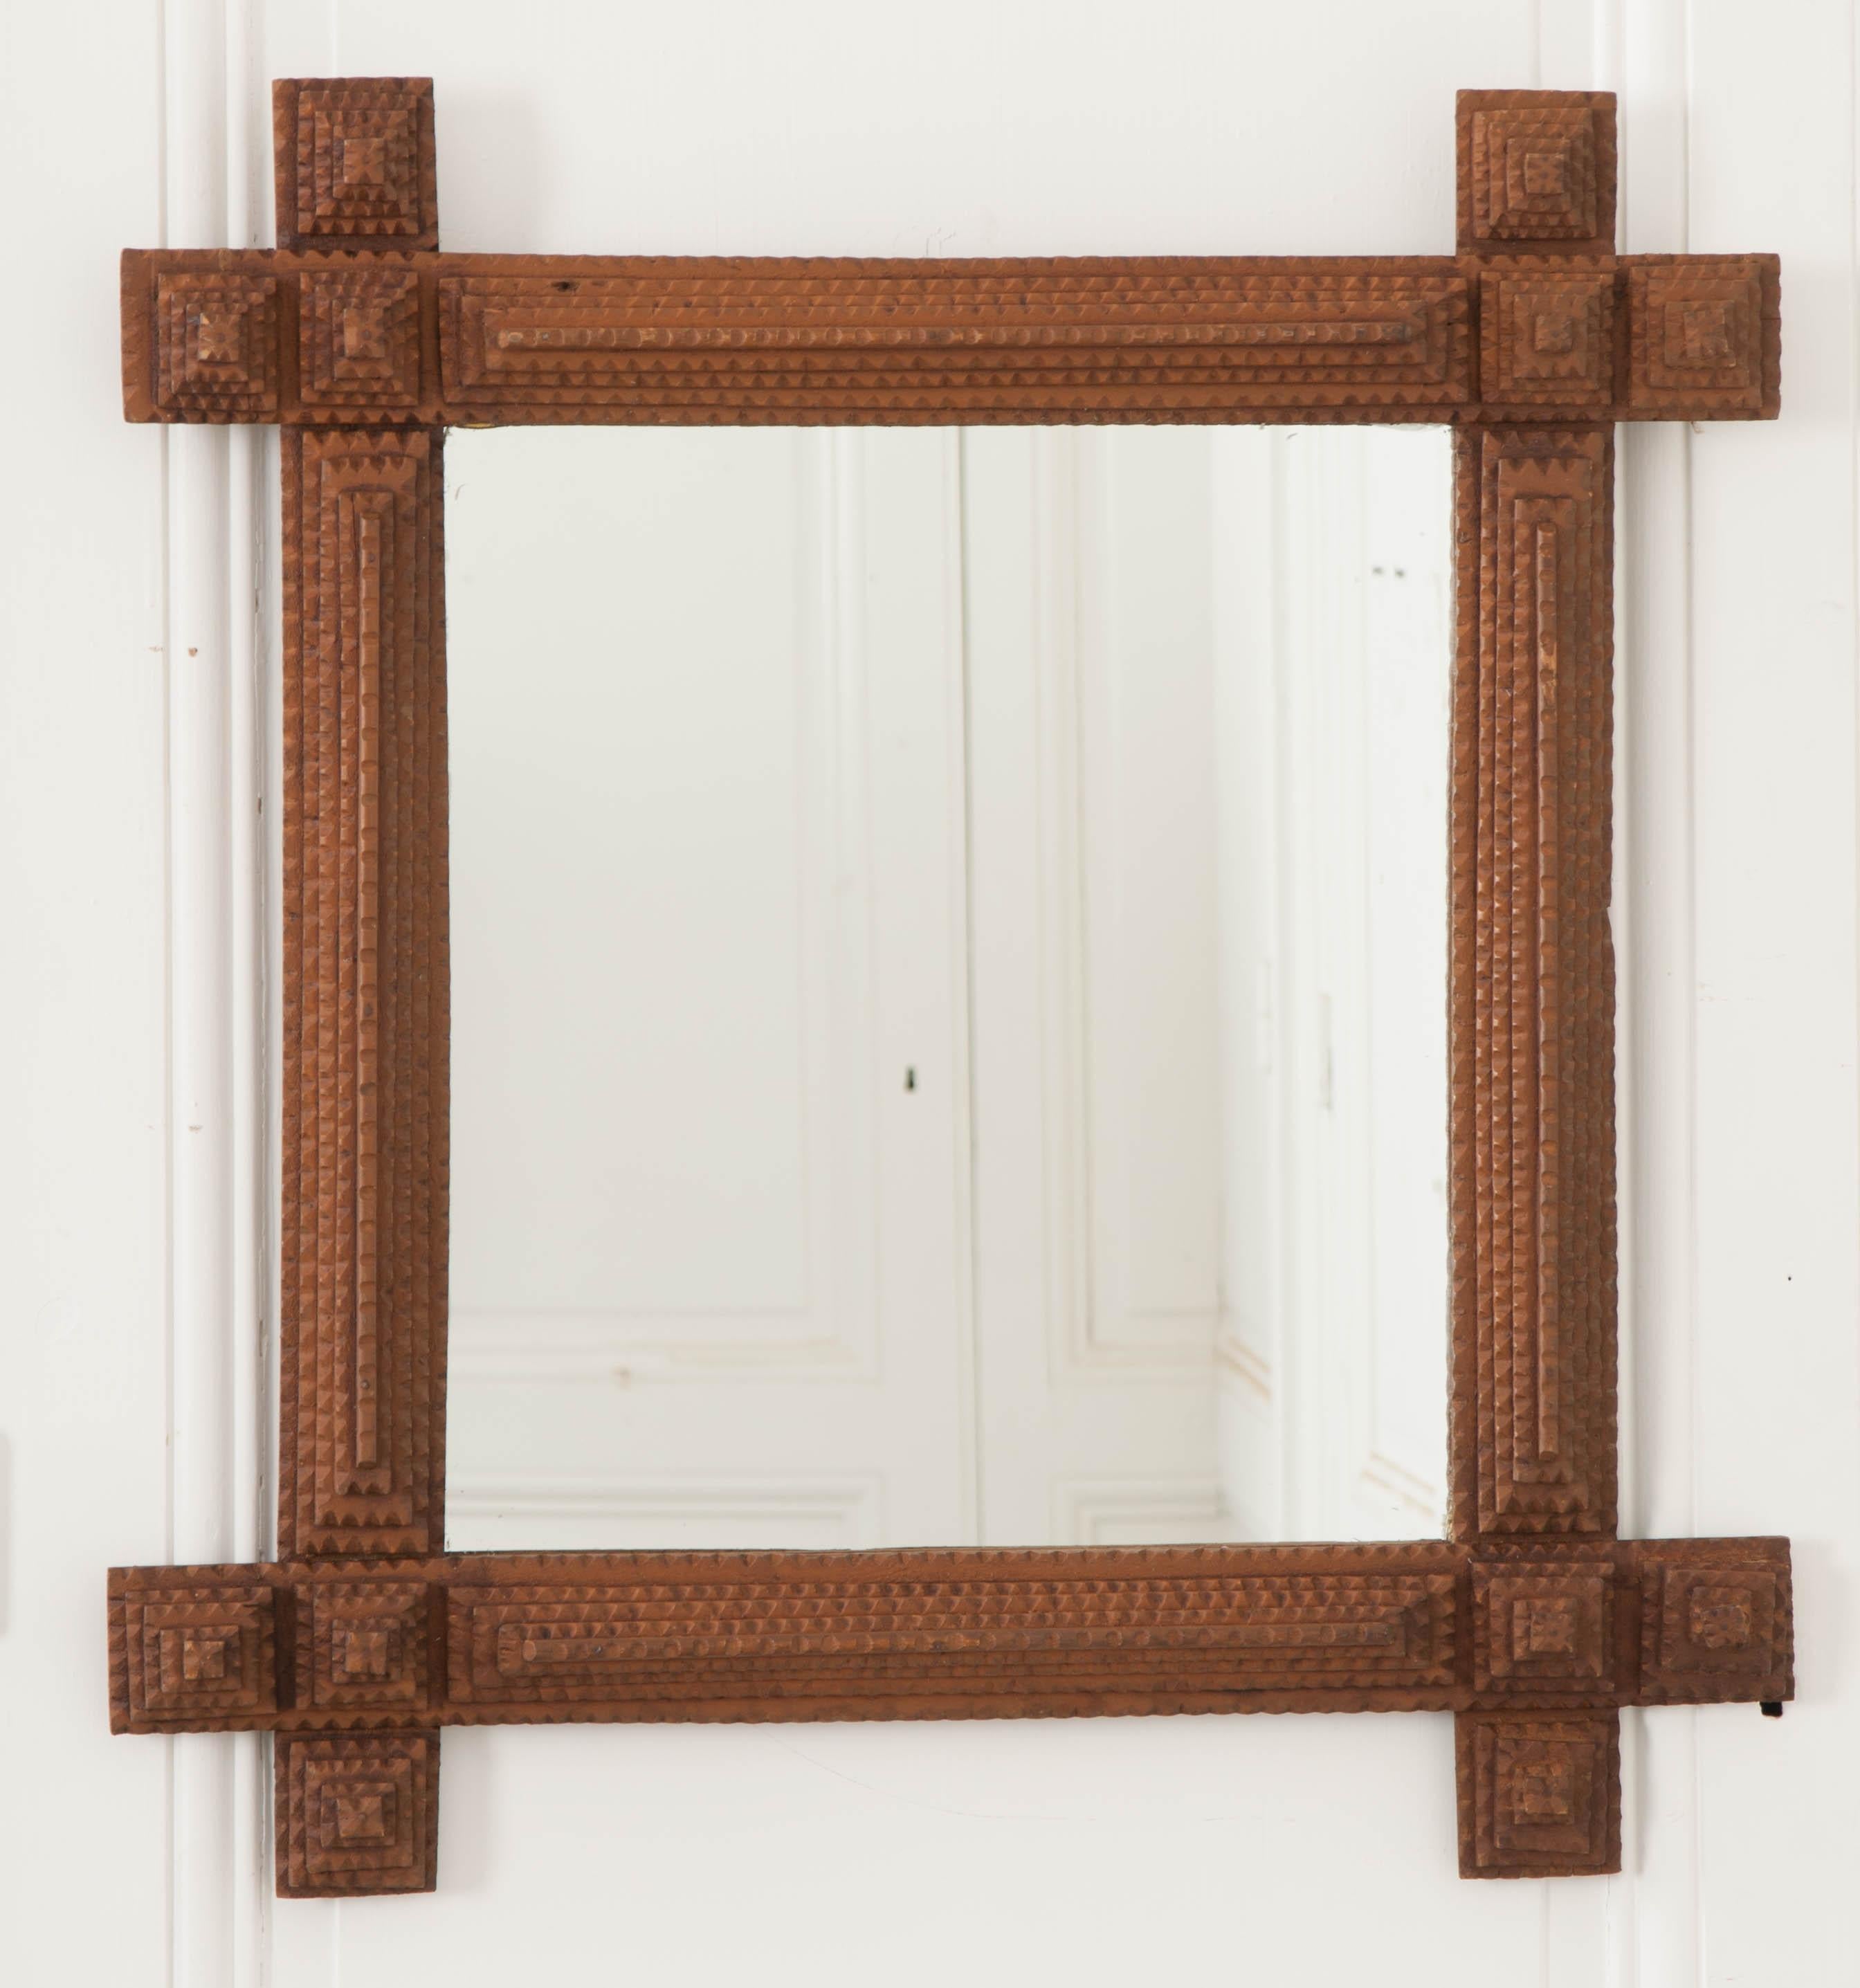 French, 19th century tramp art frame used and sold by travelers and artisans adds history and style to your interior. They are typically made of hardwood frames, simple in design, and decorated with notched pegs. The mirror glass is new.